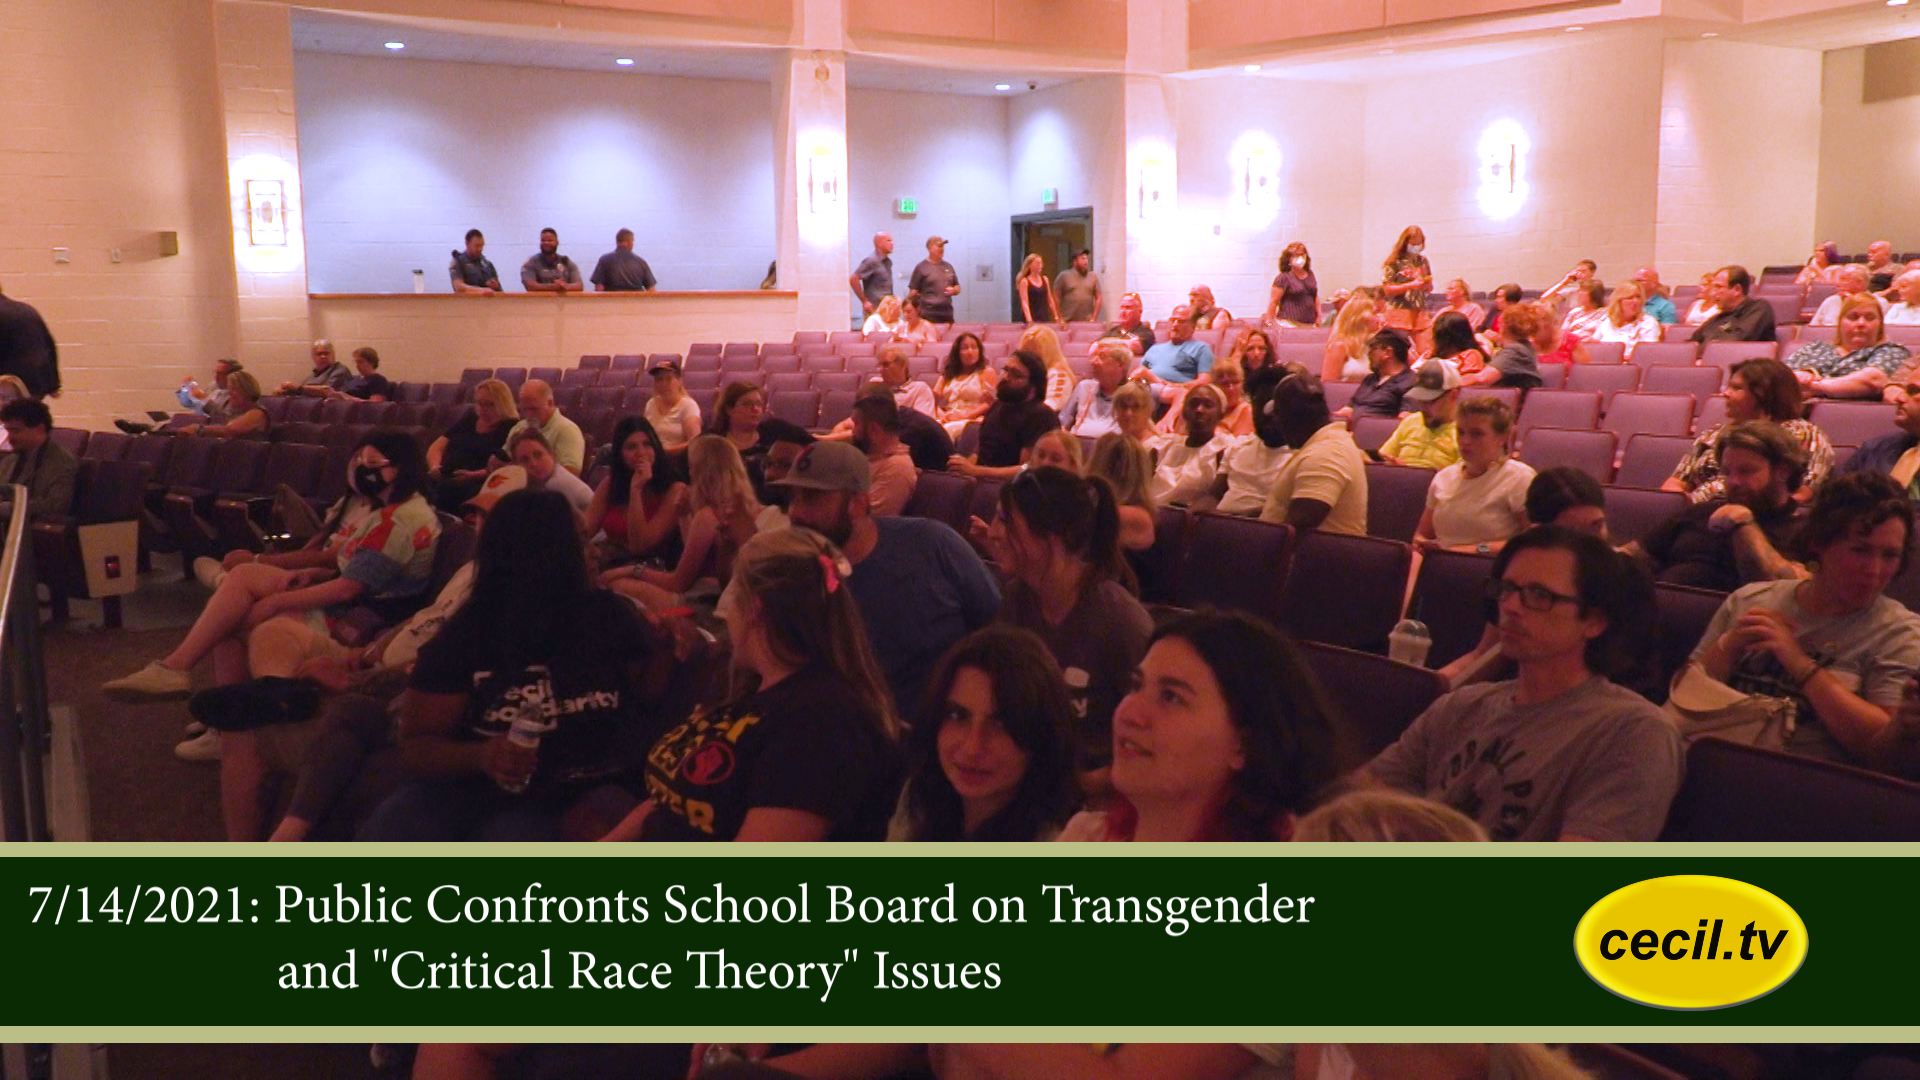 Public Confronts School Board on Transgender and "Critical Race Theory" Issues